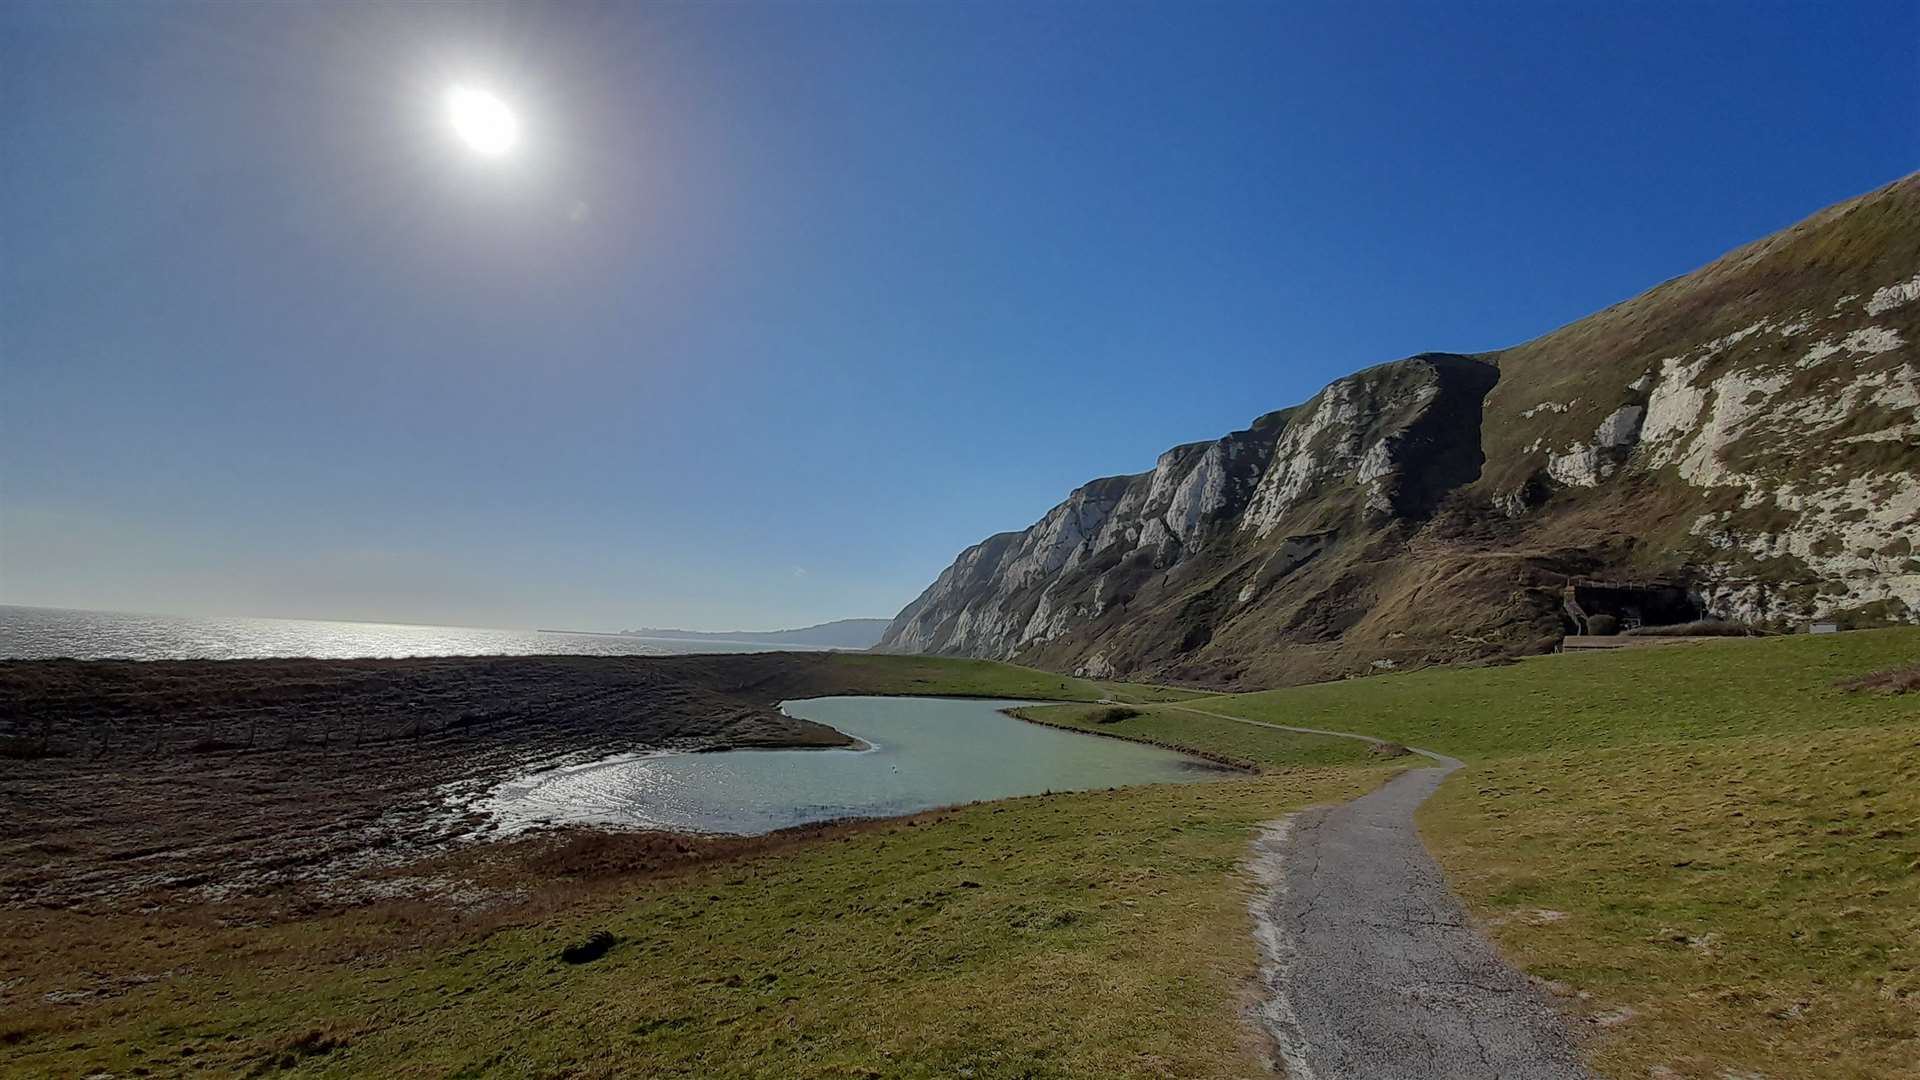 There was plenty of room for social distancing at Samphire Hoe